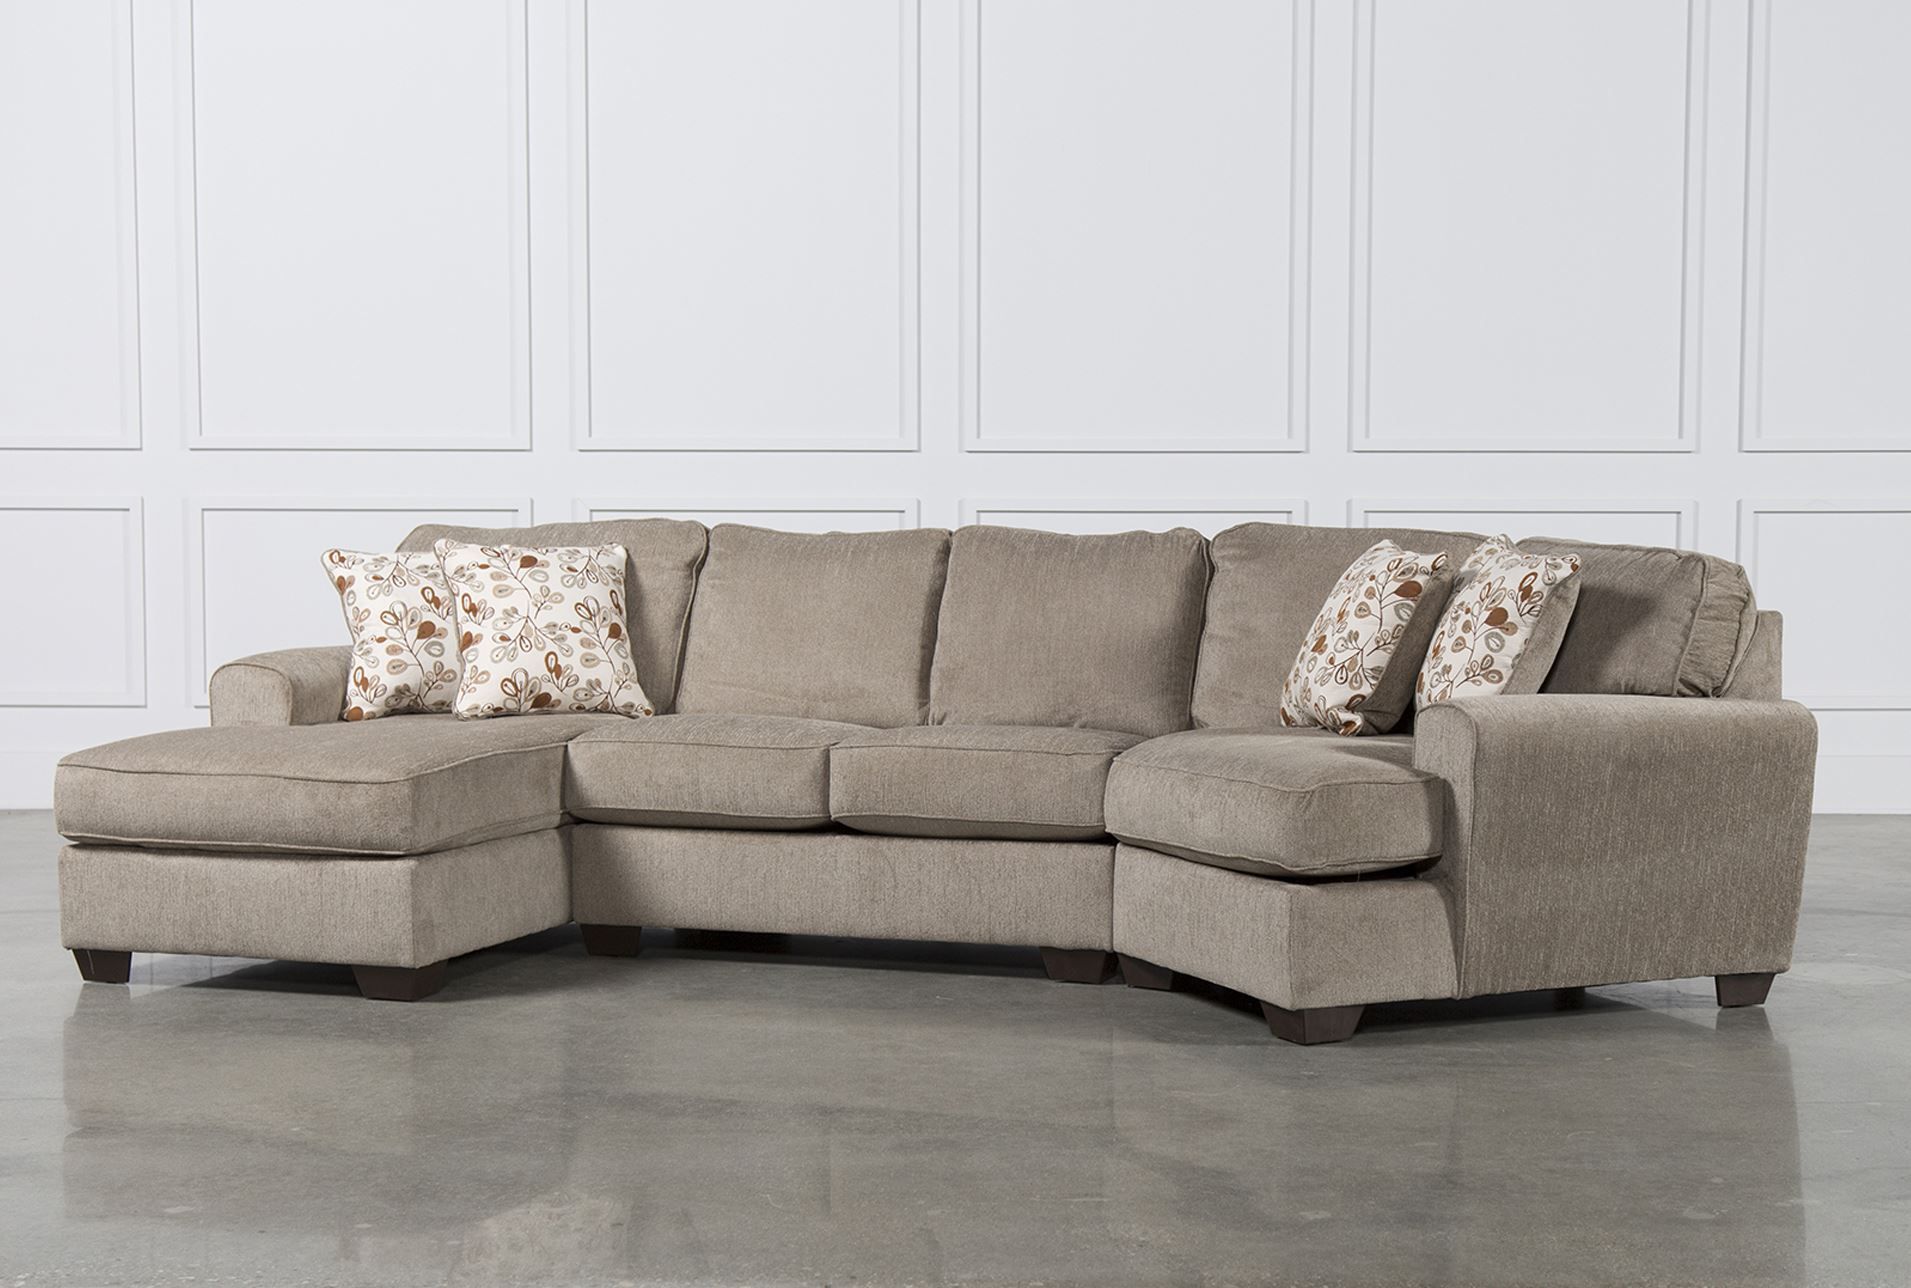 Cuddler Sectional Sofa Carena 2 Pc Fabric Sectional Sofa Regarding 2Pc Maddox Right Arm Facing Sectional Sofas With Chaise Brown (View 3 of 15)